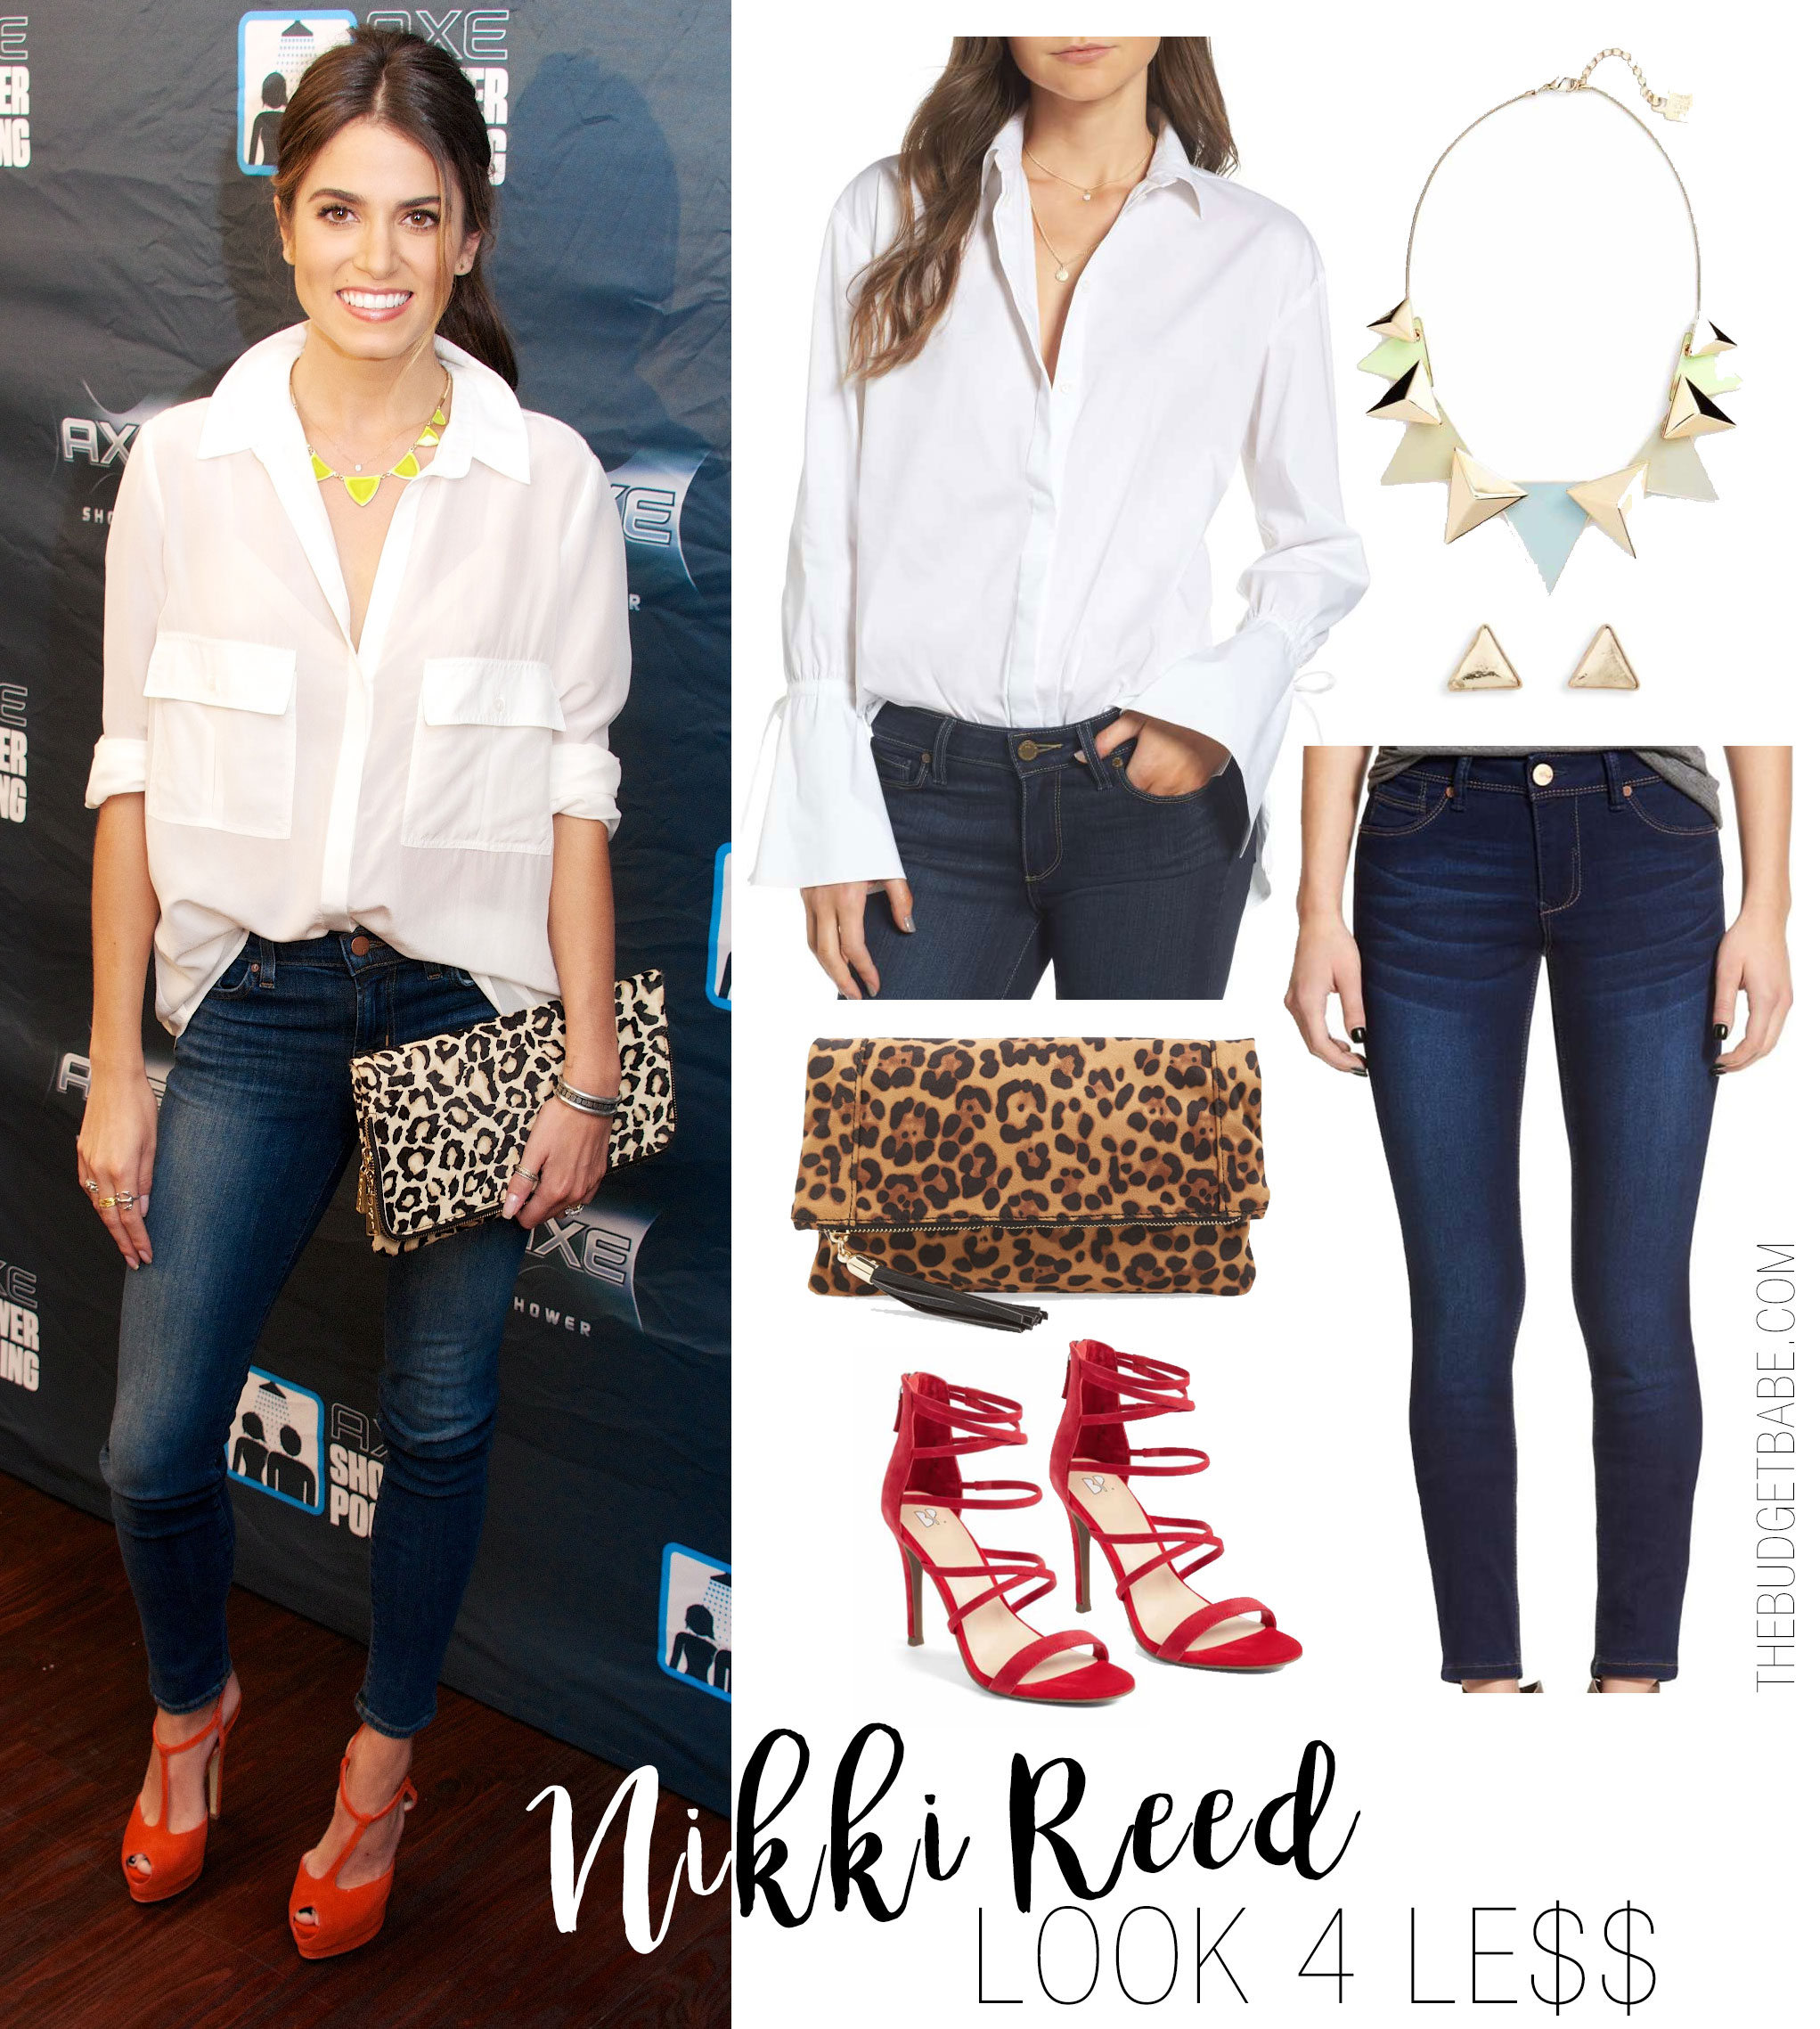 Nikki Reed celebrity look for less featuring white shirt, skinny jeans, leopard clutch, red heels